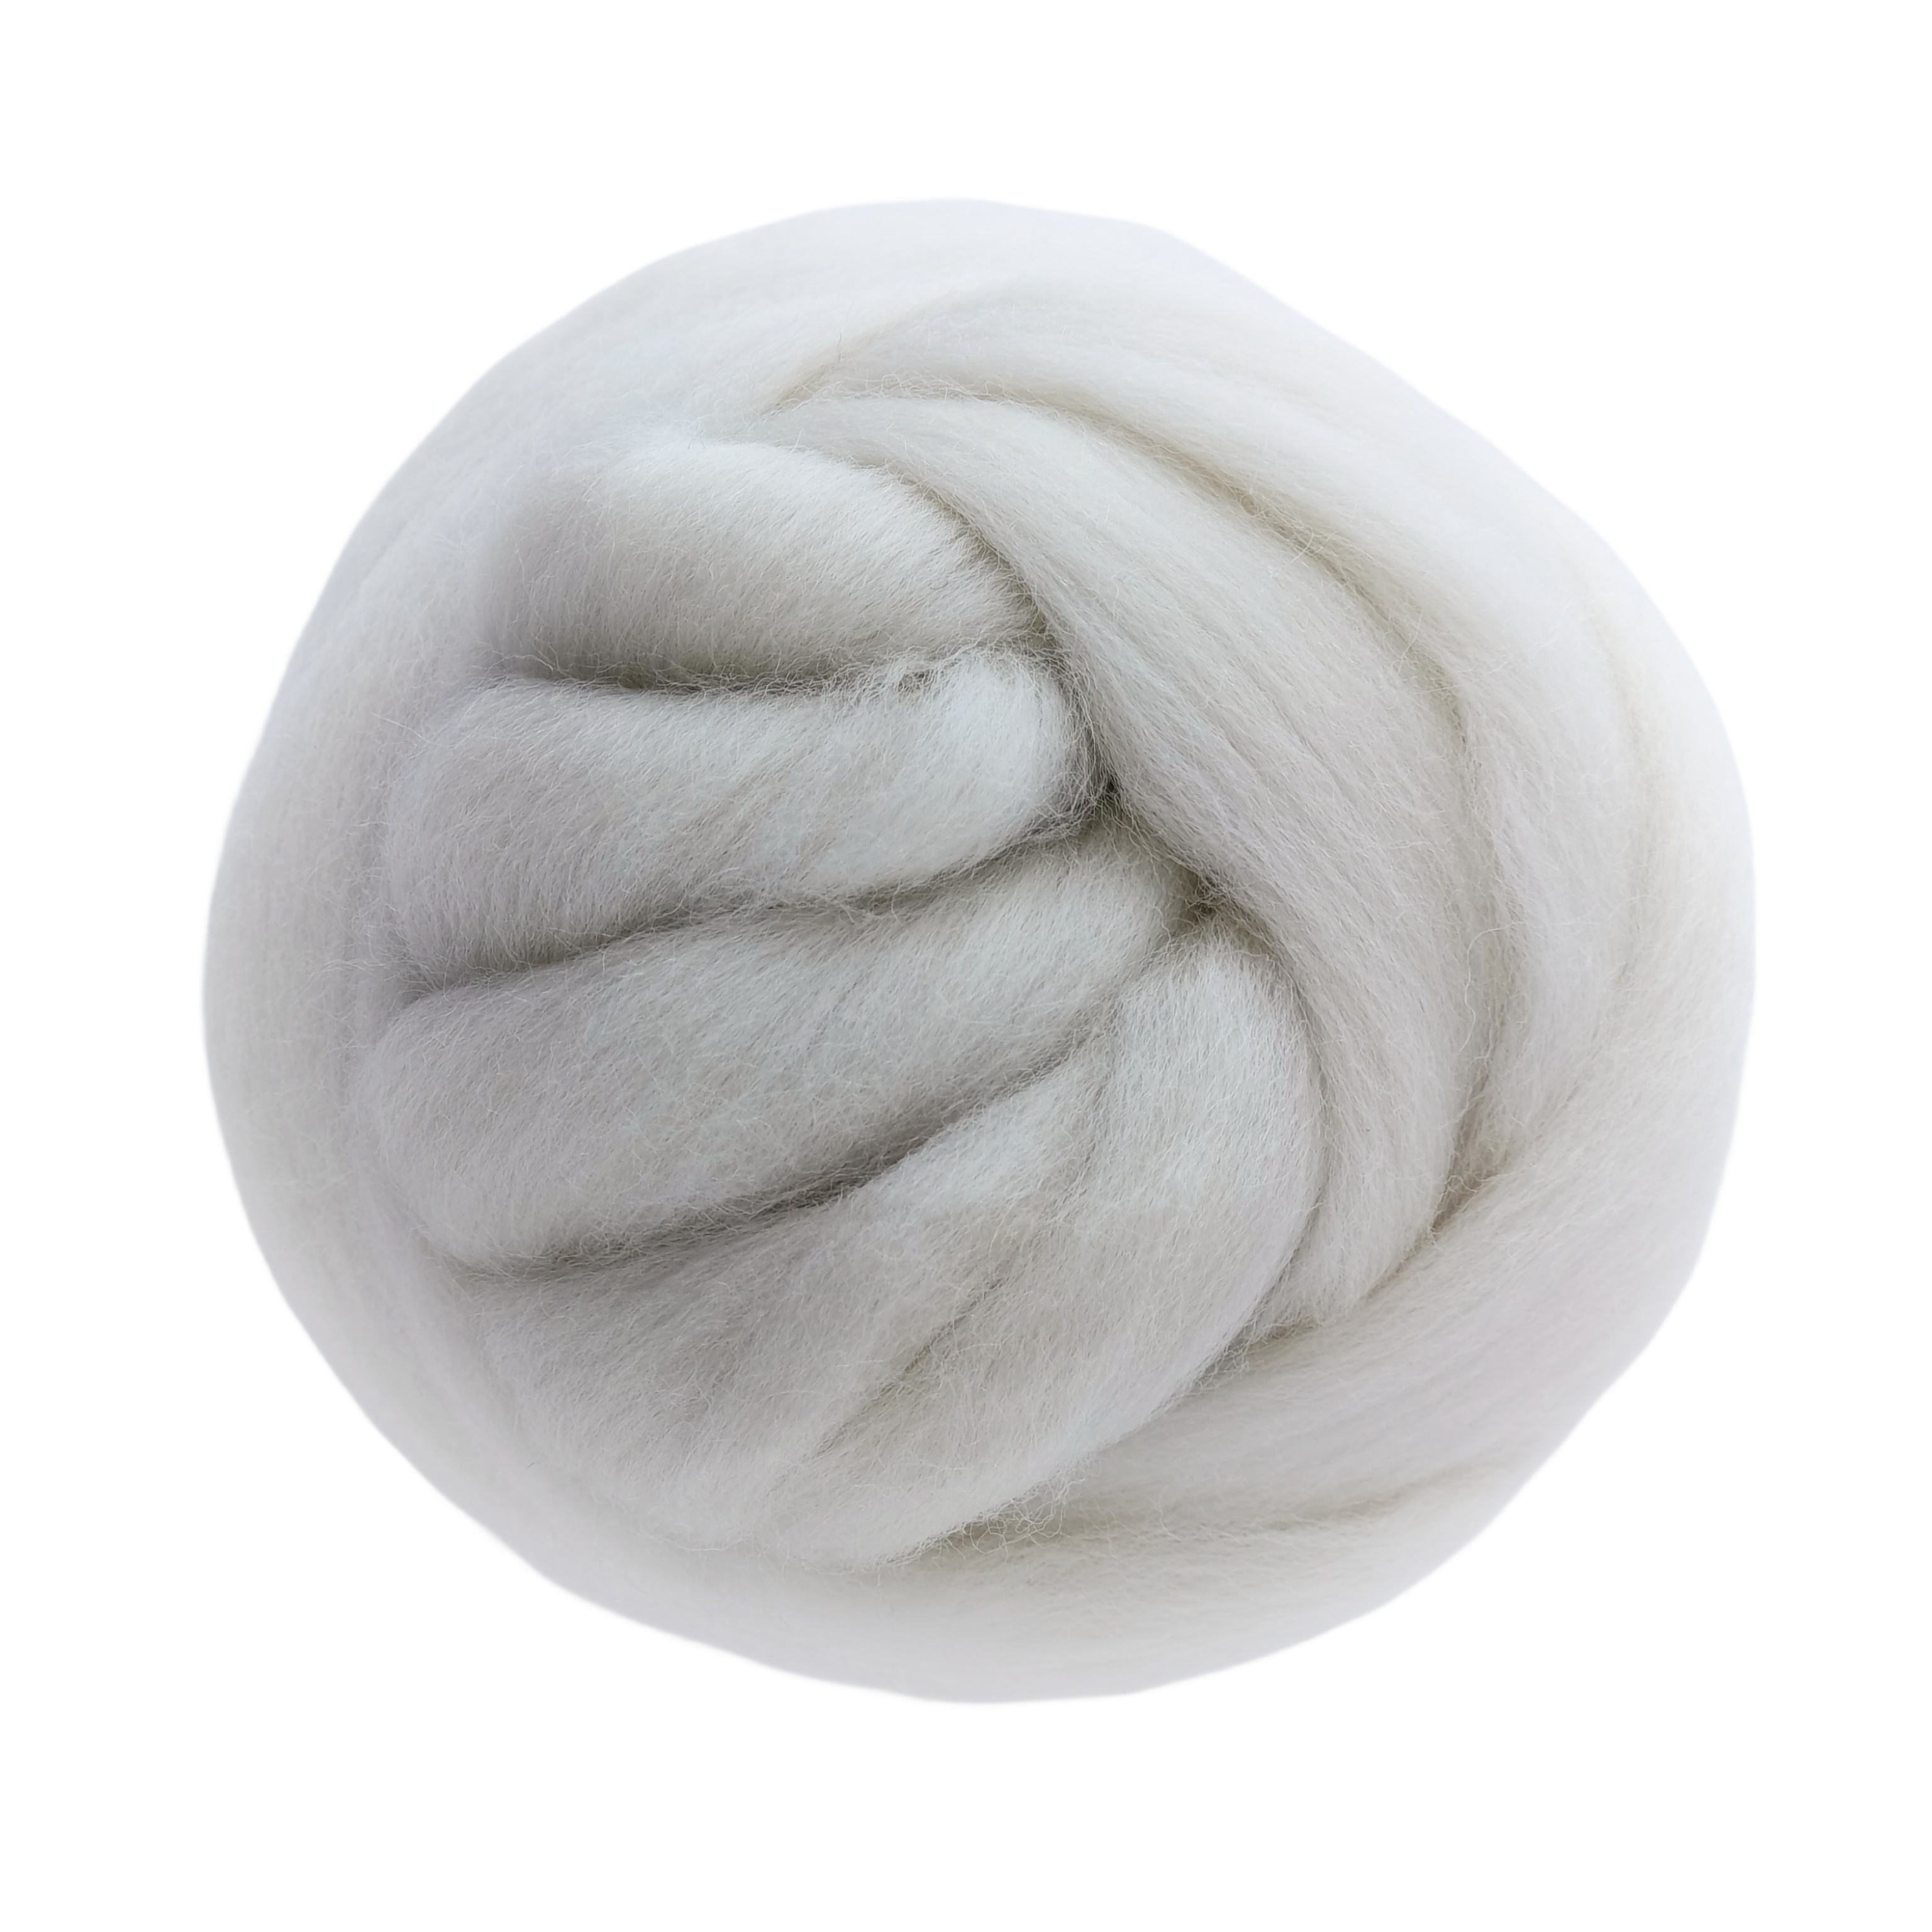  Wool Roving Bulk - 8.82oz Super Wool Chunky Yarn, Wool Roving  Top for Needle Felting, Soft Felting Wool Supplies for Hand Spinning,  Felting, Blending, Weaving and DIY Craft : Arts, Crafts